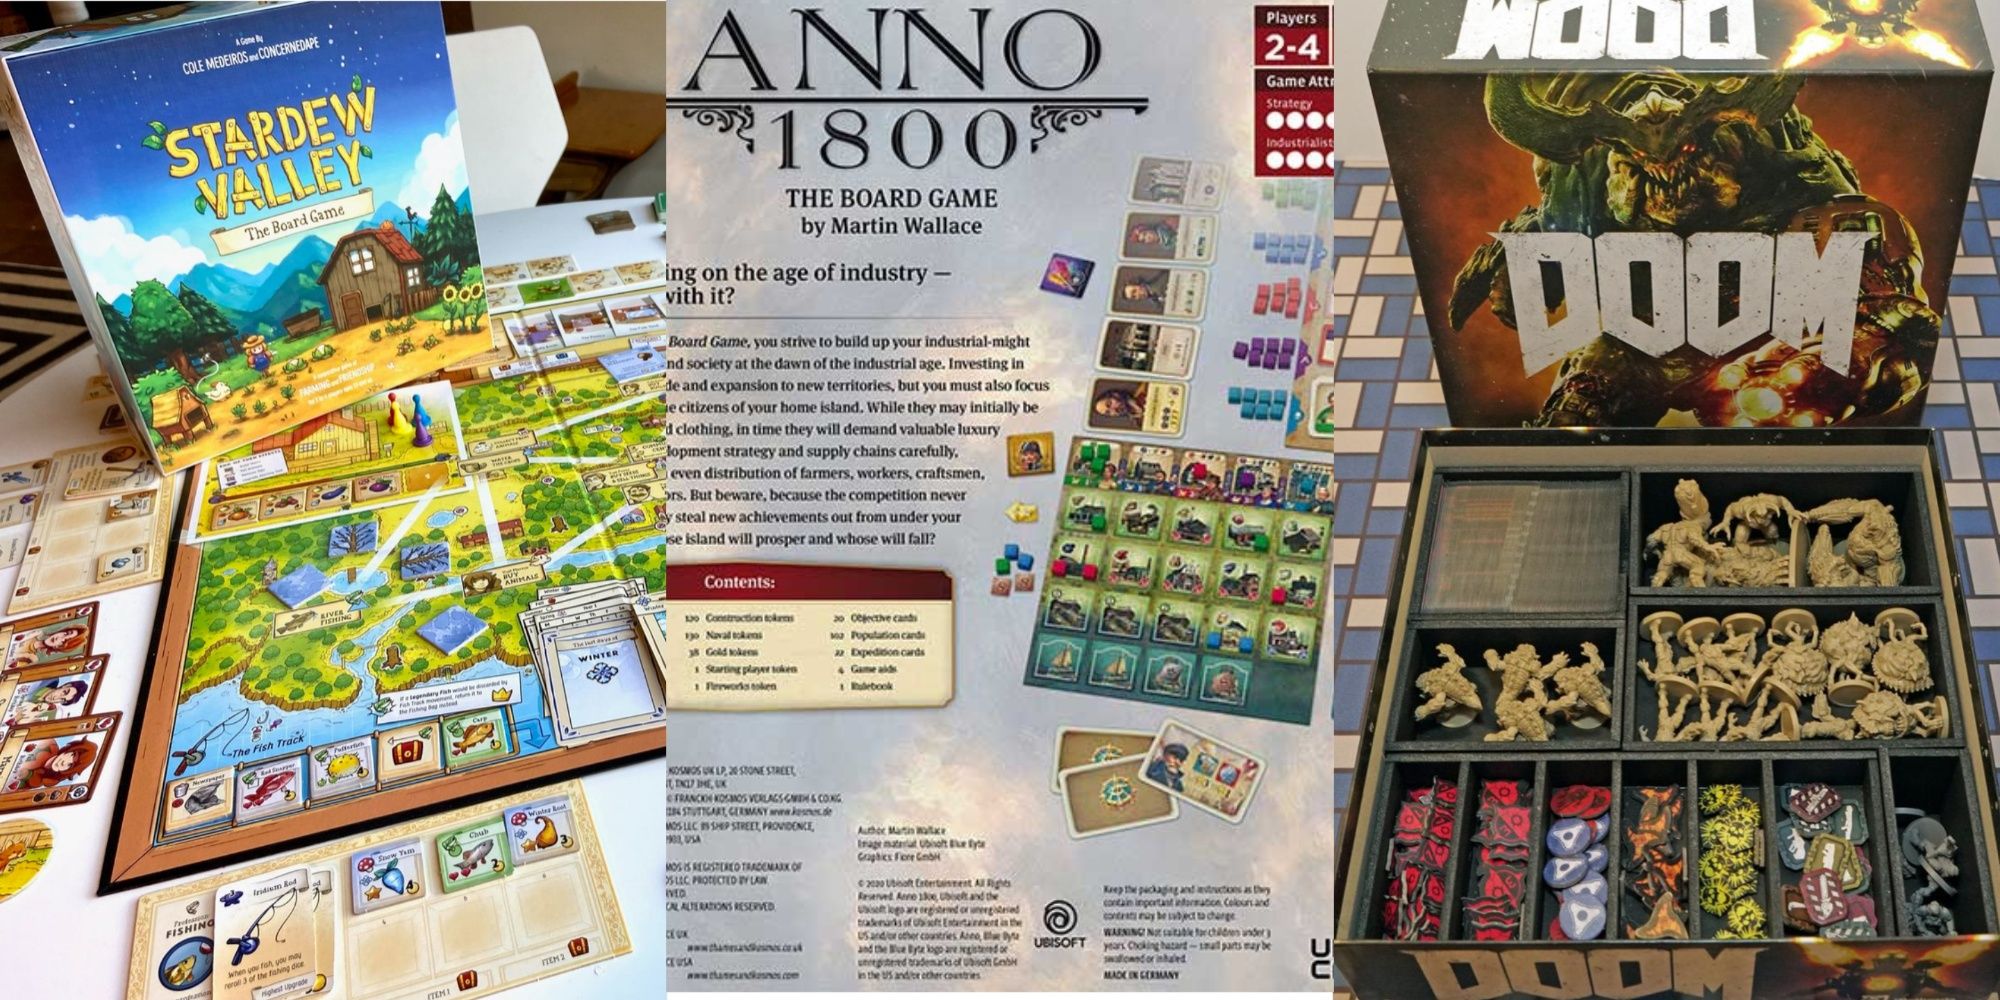 The board games based on Stardew Valley, Anno 1800 and Doom (2016)